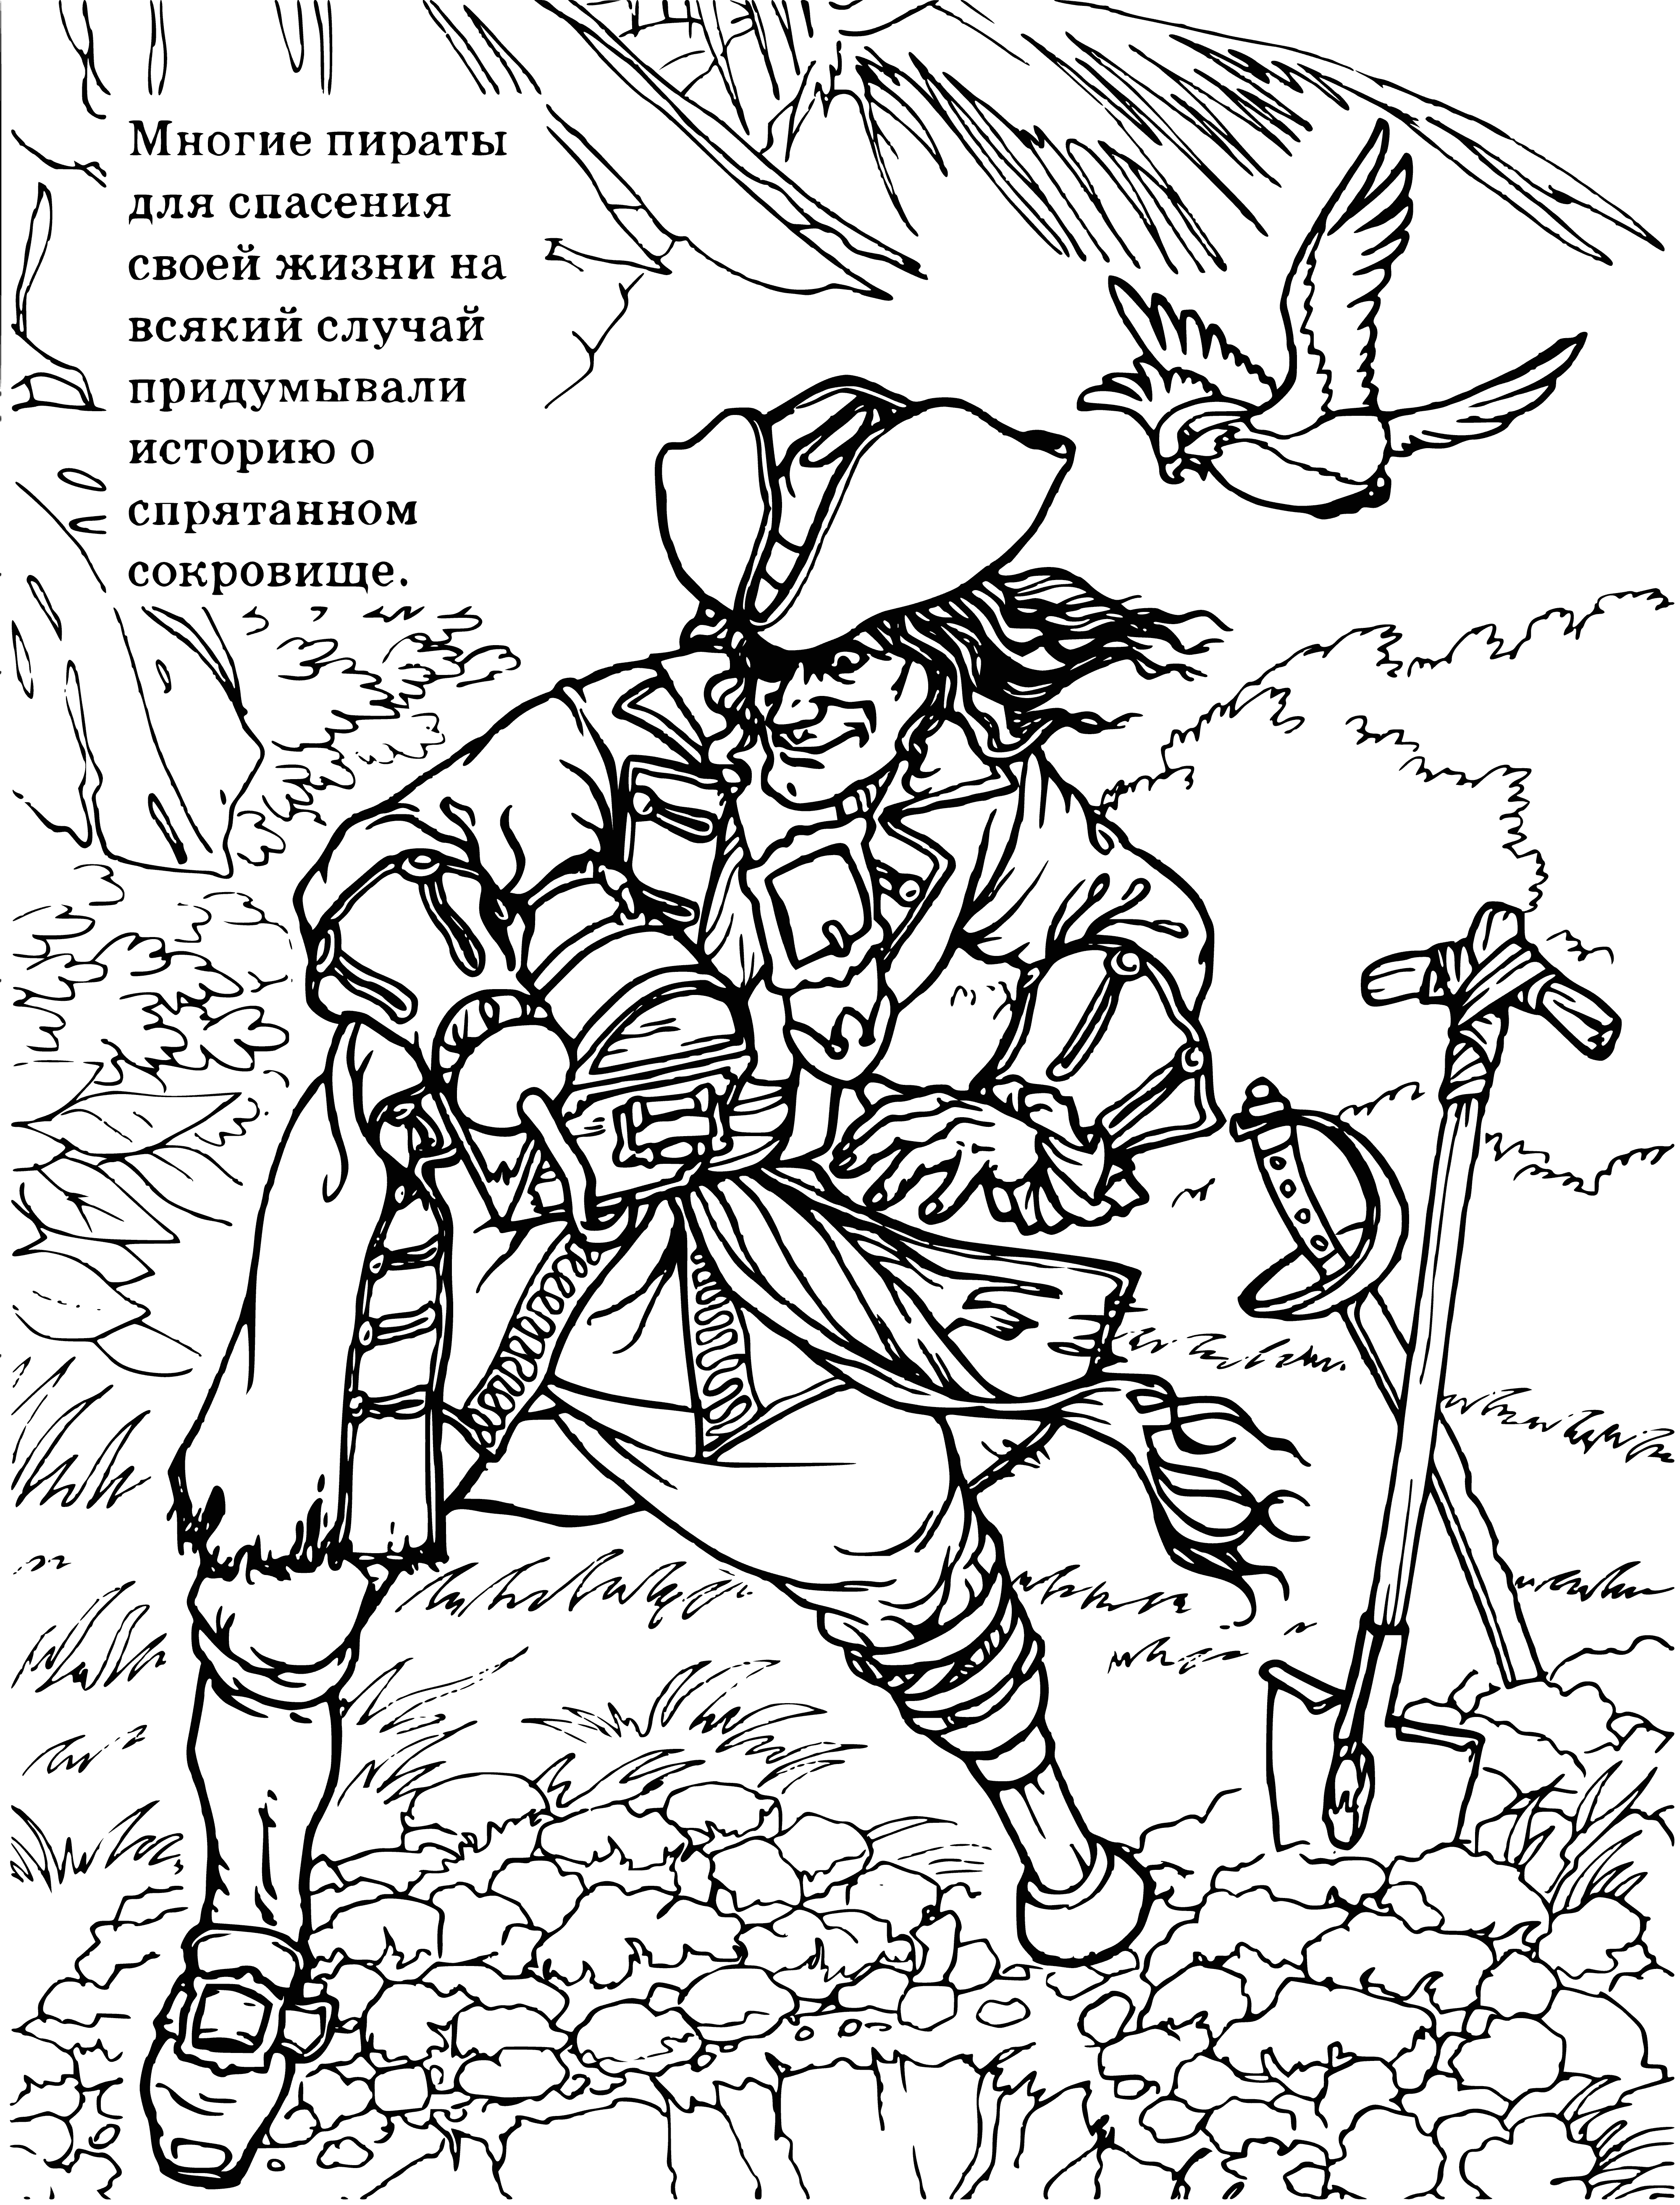 coloring page: Pirates gathered around a treasure chest; swords, daggers, pistols, guns - they ready to fight for their new treasure! #pirates #treasurehunt